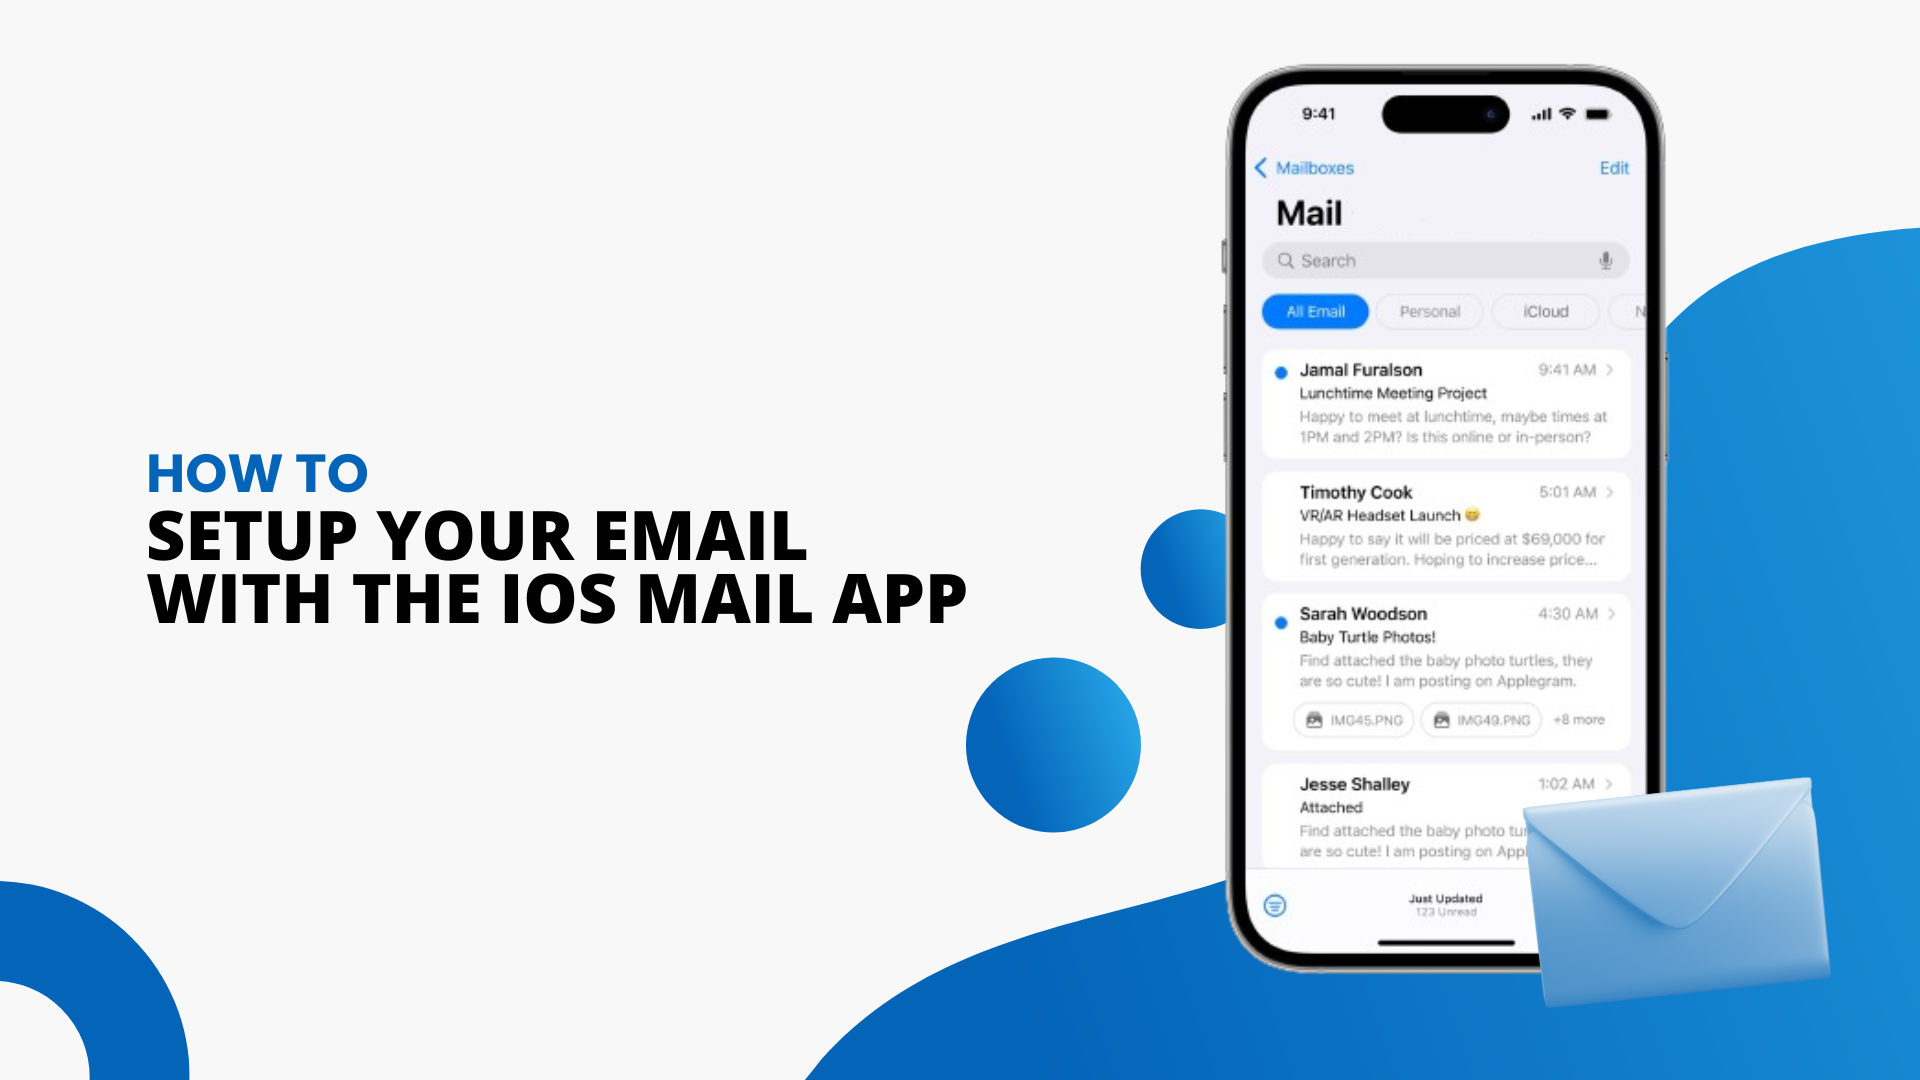 How to Setup Your Email Using iOS Mail App